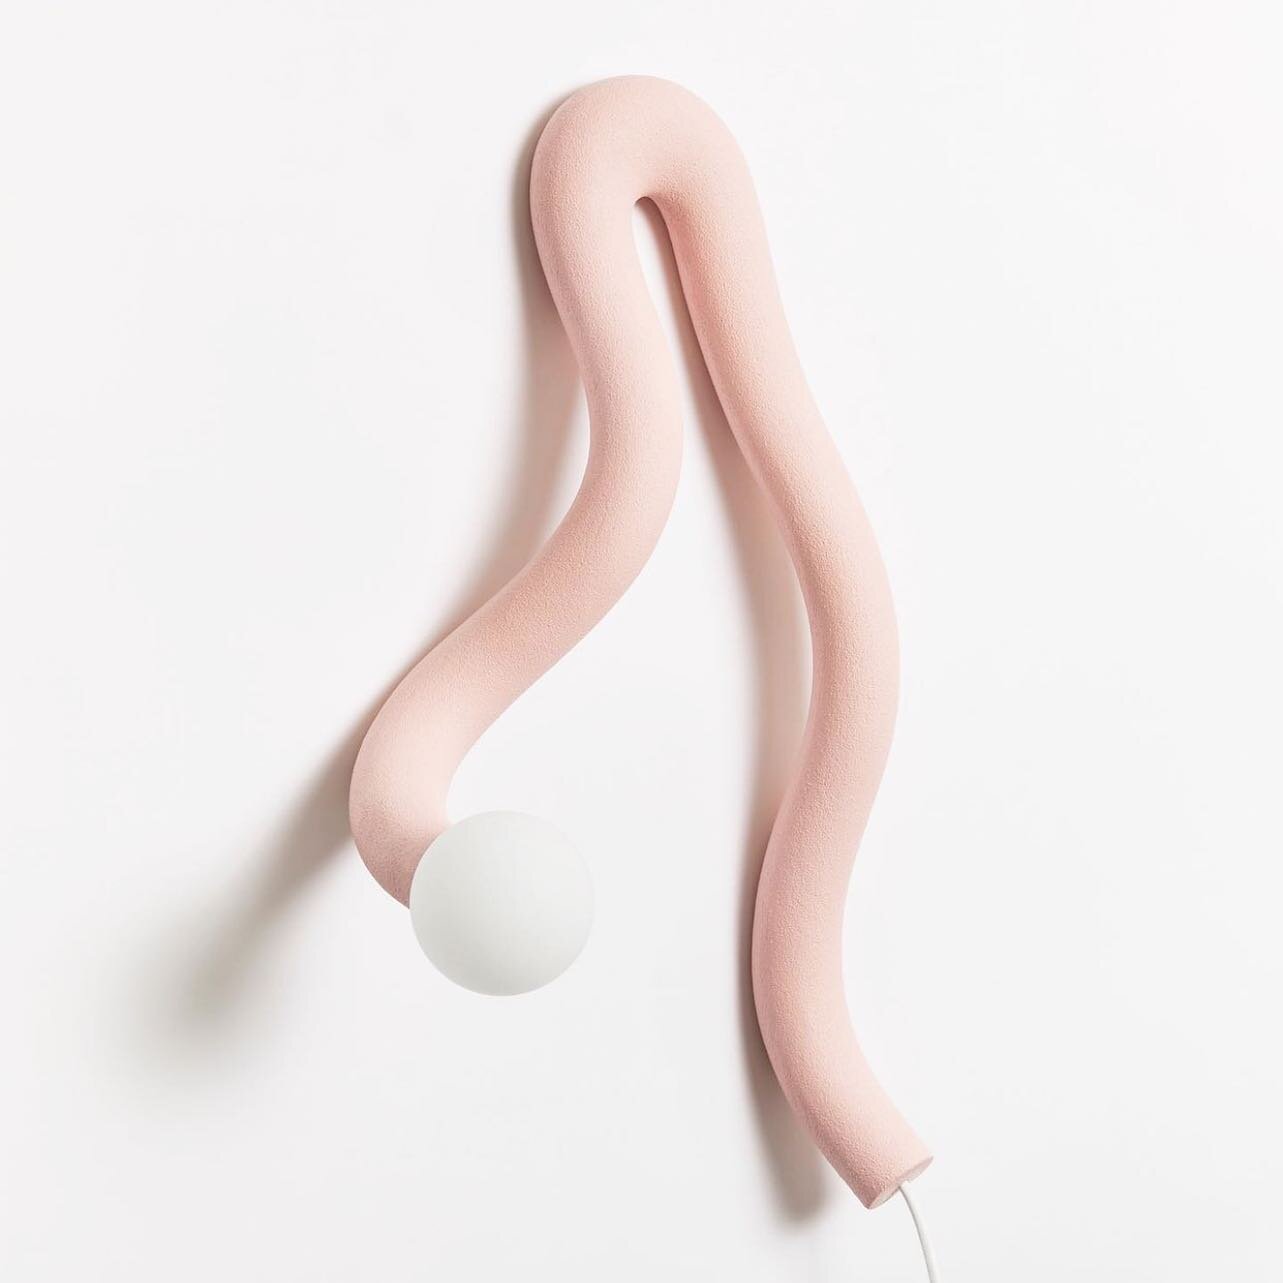 Researching fun accents for the nursery like this sconce that feels like sculpture by @adorno.design ✨